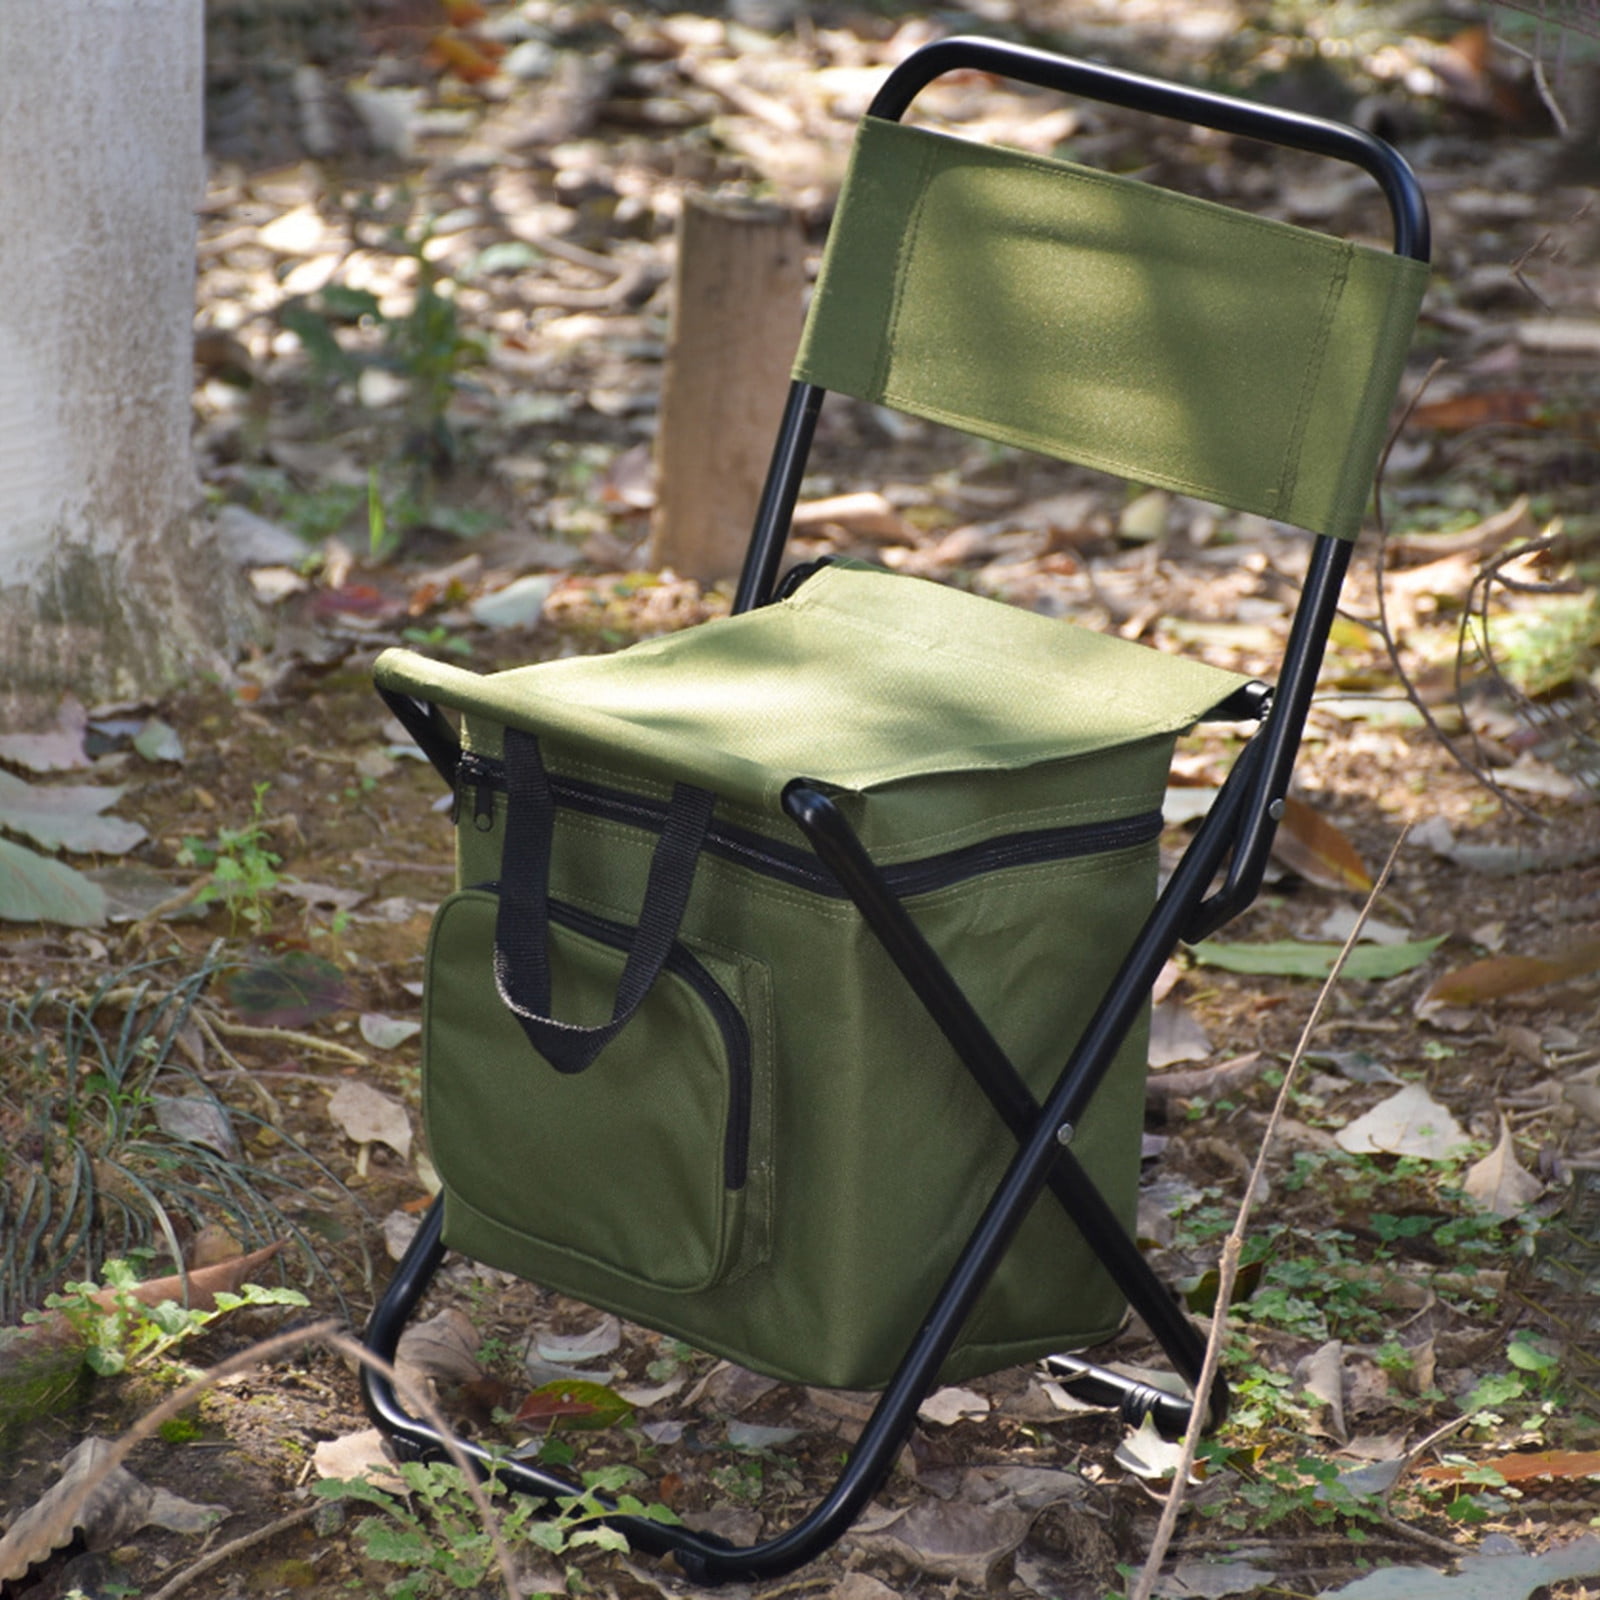 Camping Essential Clearance -Outdoor Folding Chair With Cooler Bag Compact Fishing  Stool Fishing Chair With Double Oxford Cloth Cooler Bag For  Fishing/Beach/Camping/Family/Outing Outdoor Travel 